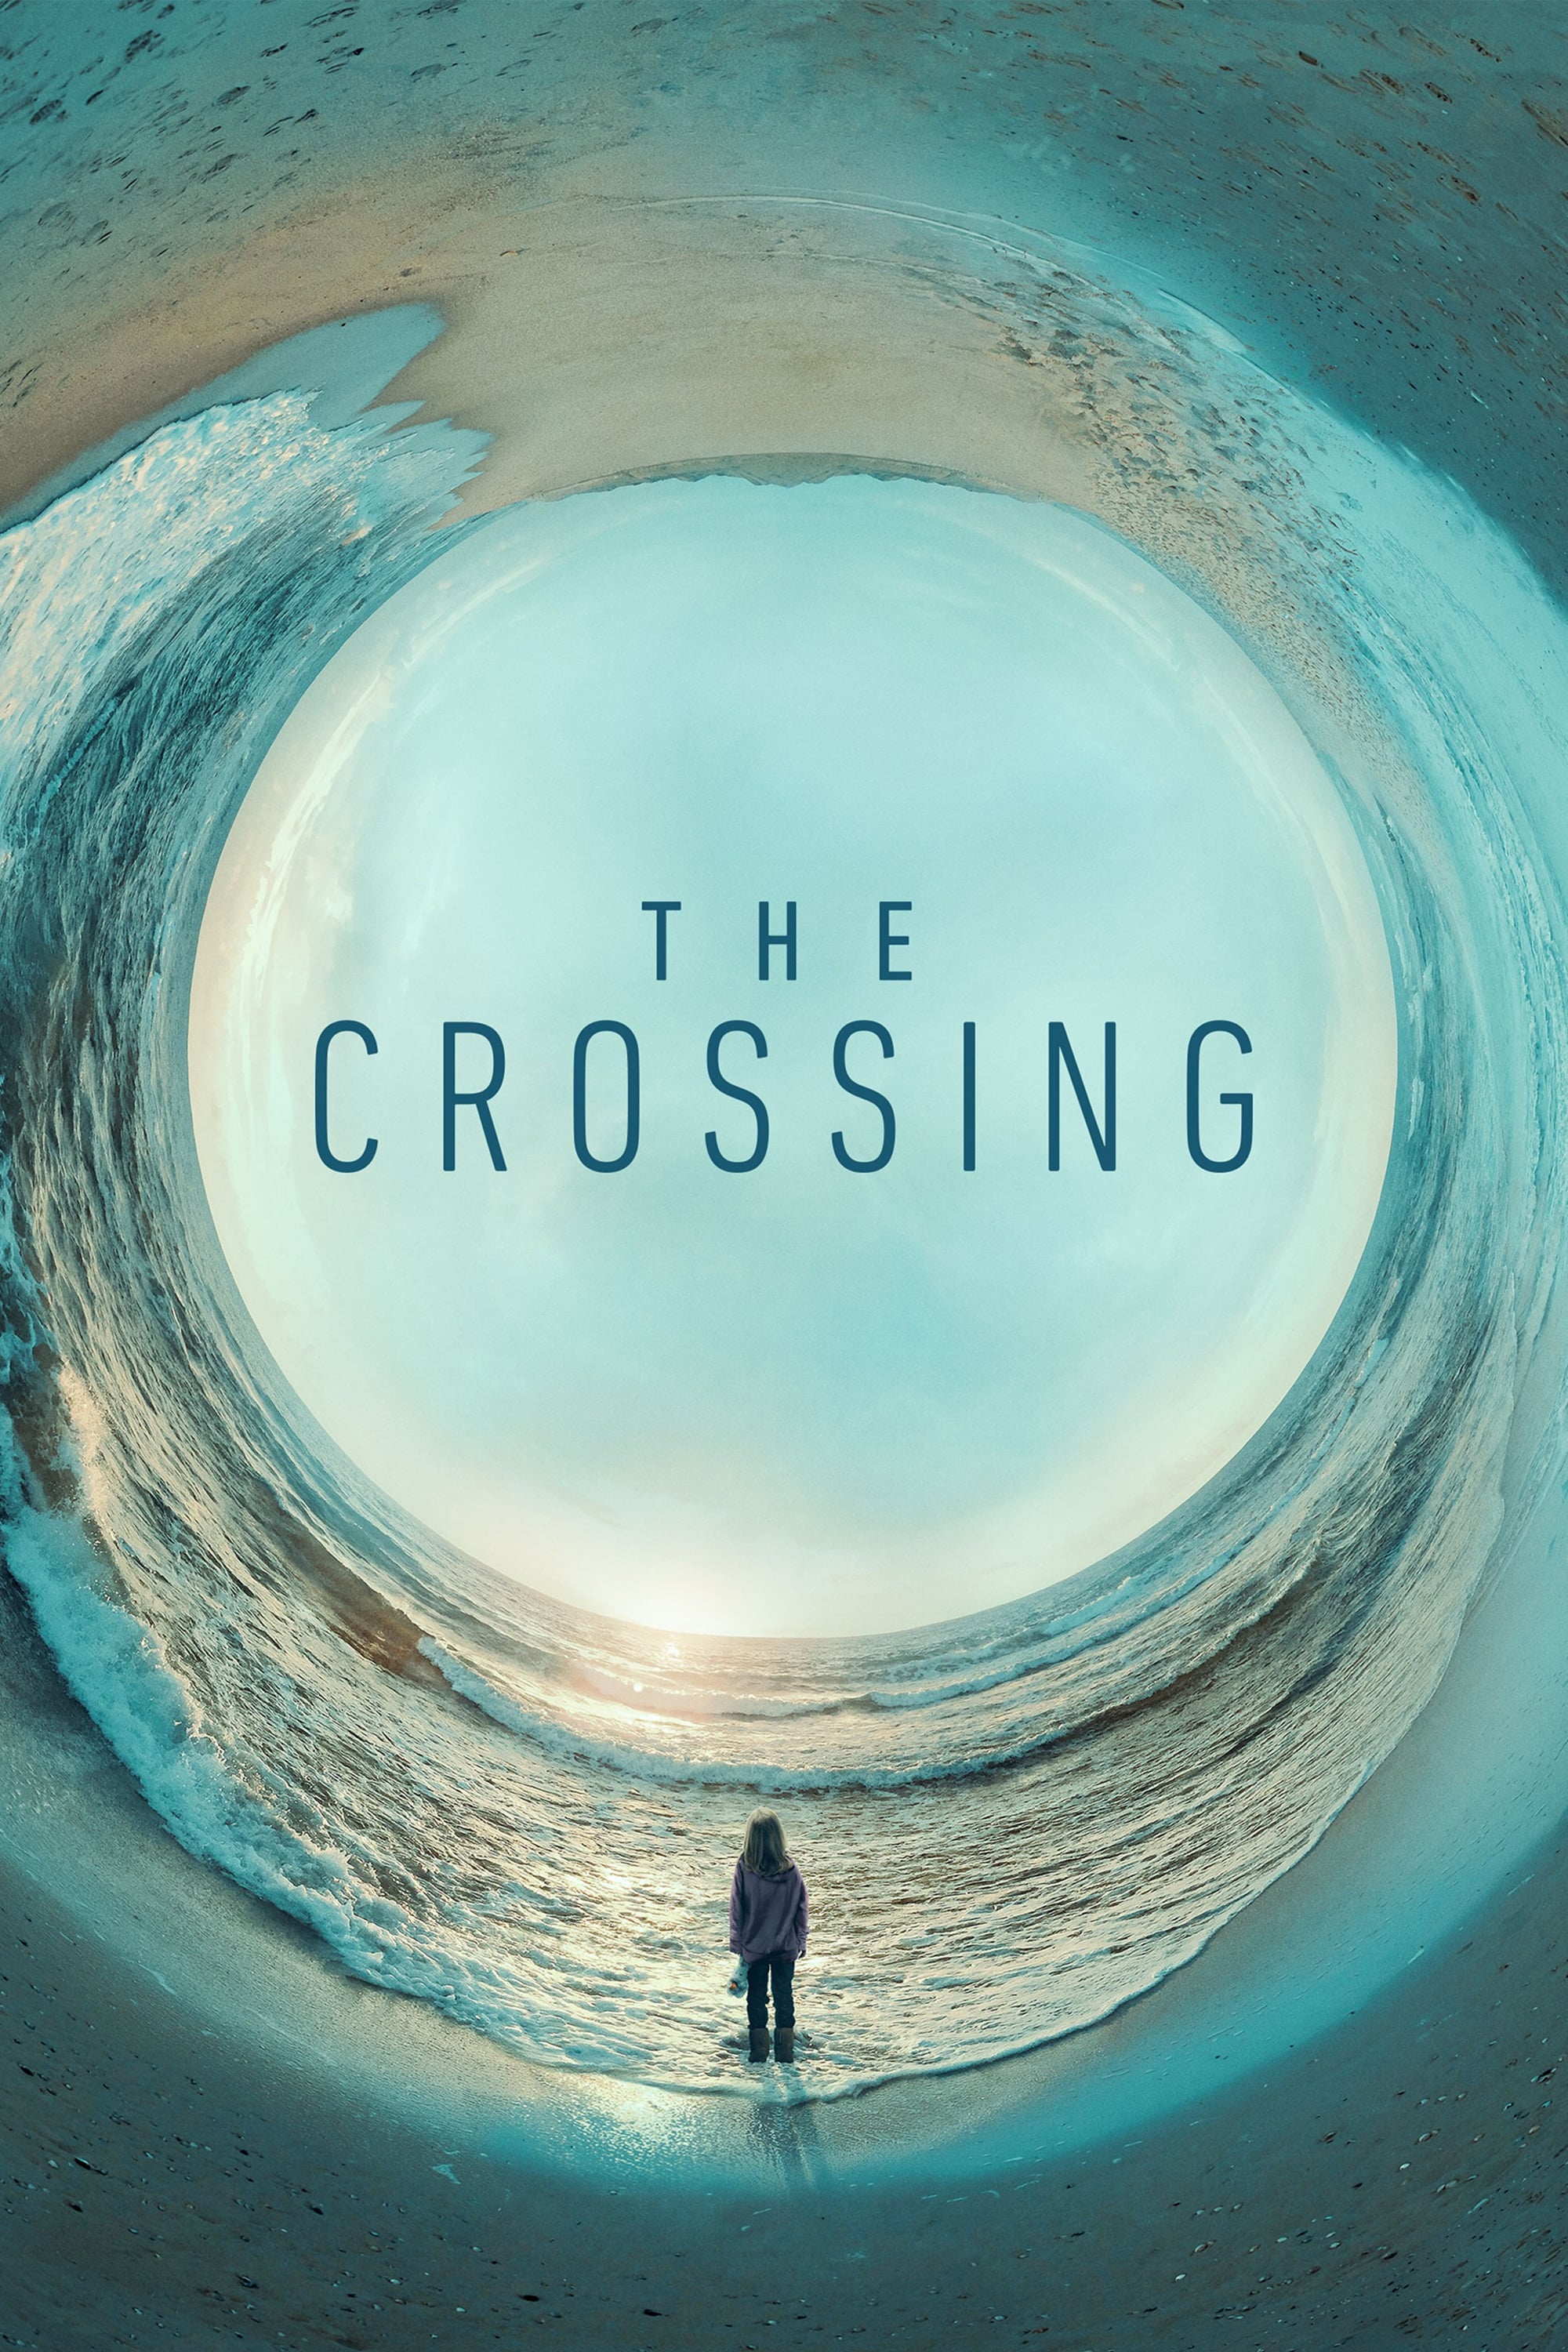 The Crossing rating